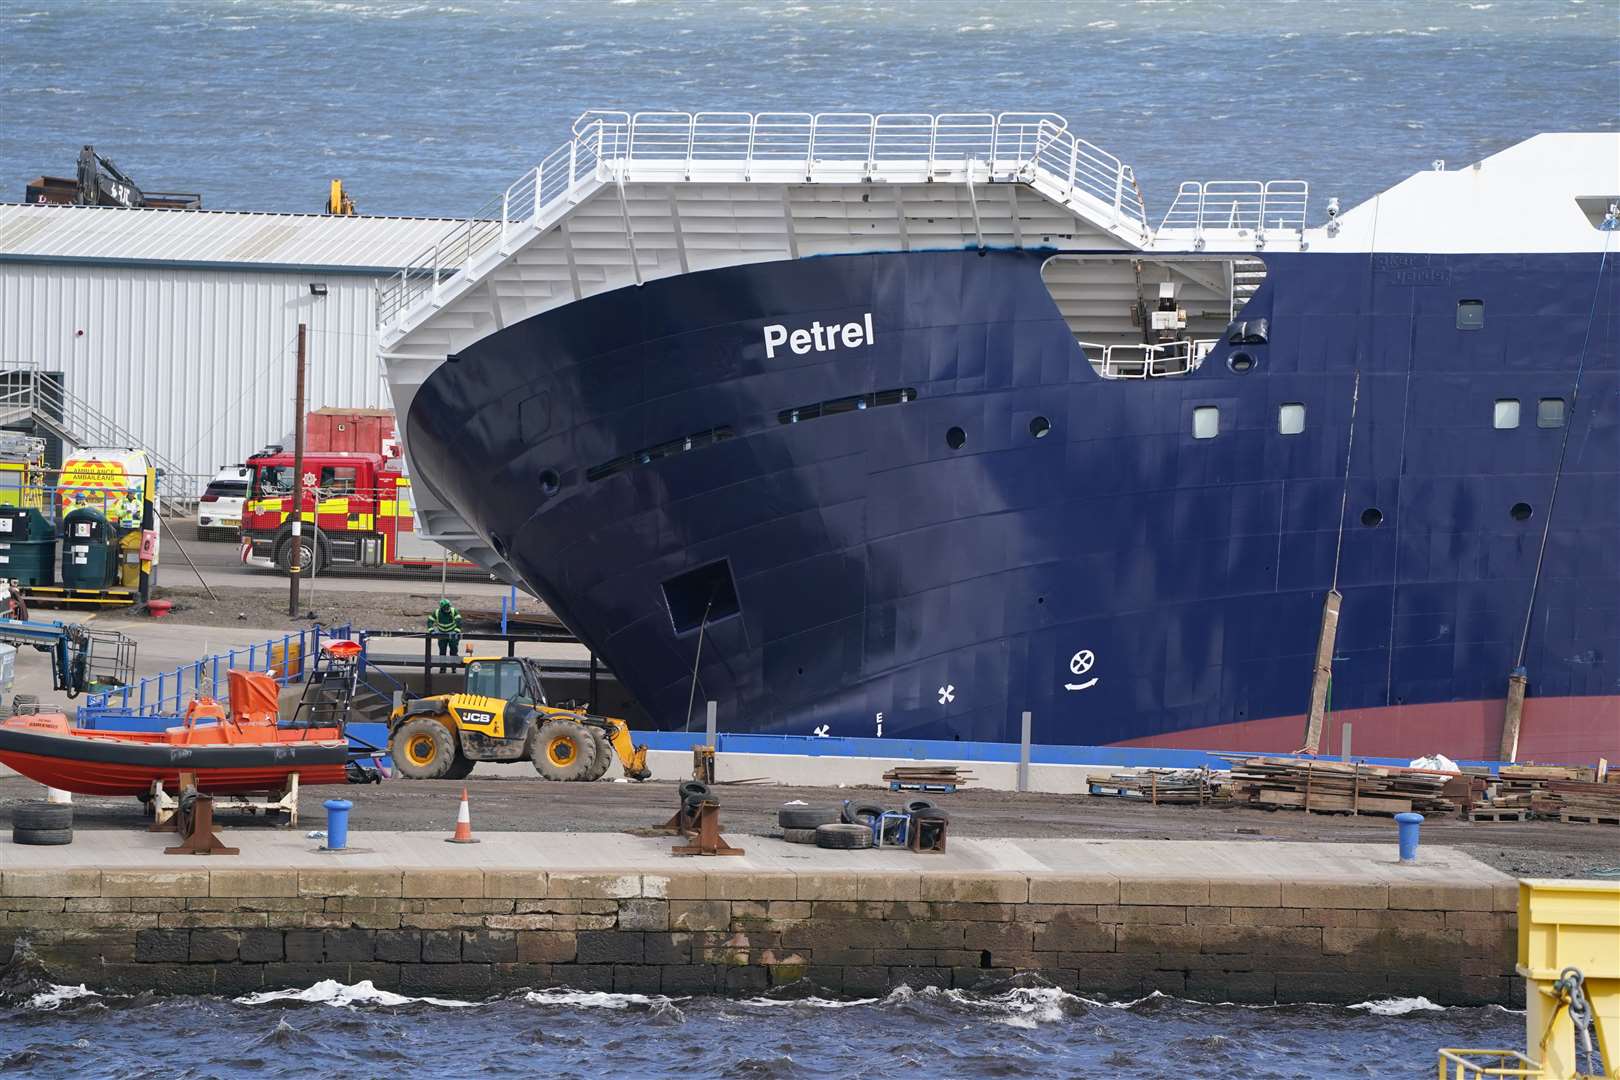 The vessel is leaning on its side following the incident at Imperial Dock in Leith (Andrew Milligan/PA)